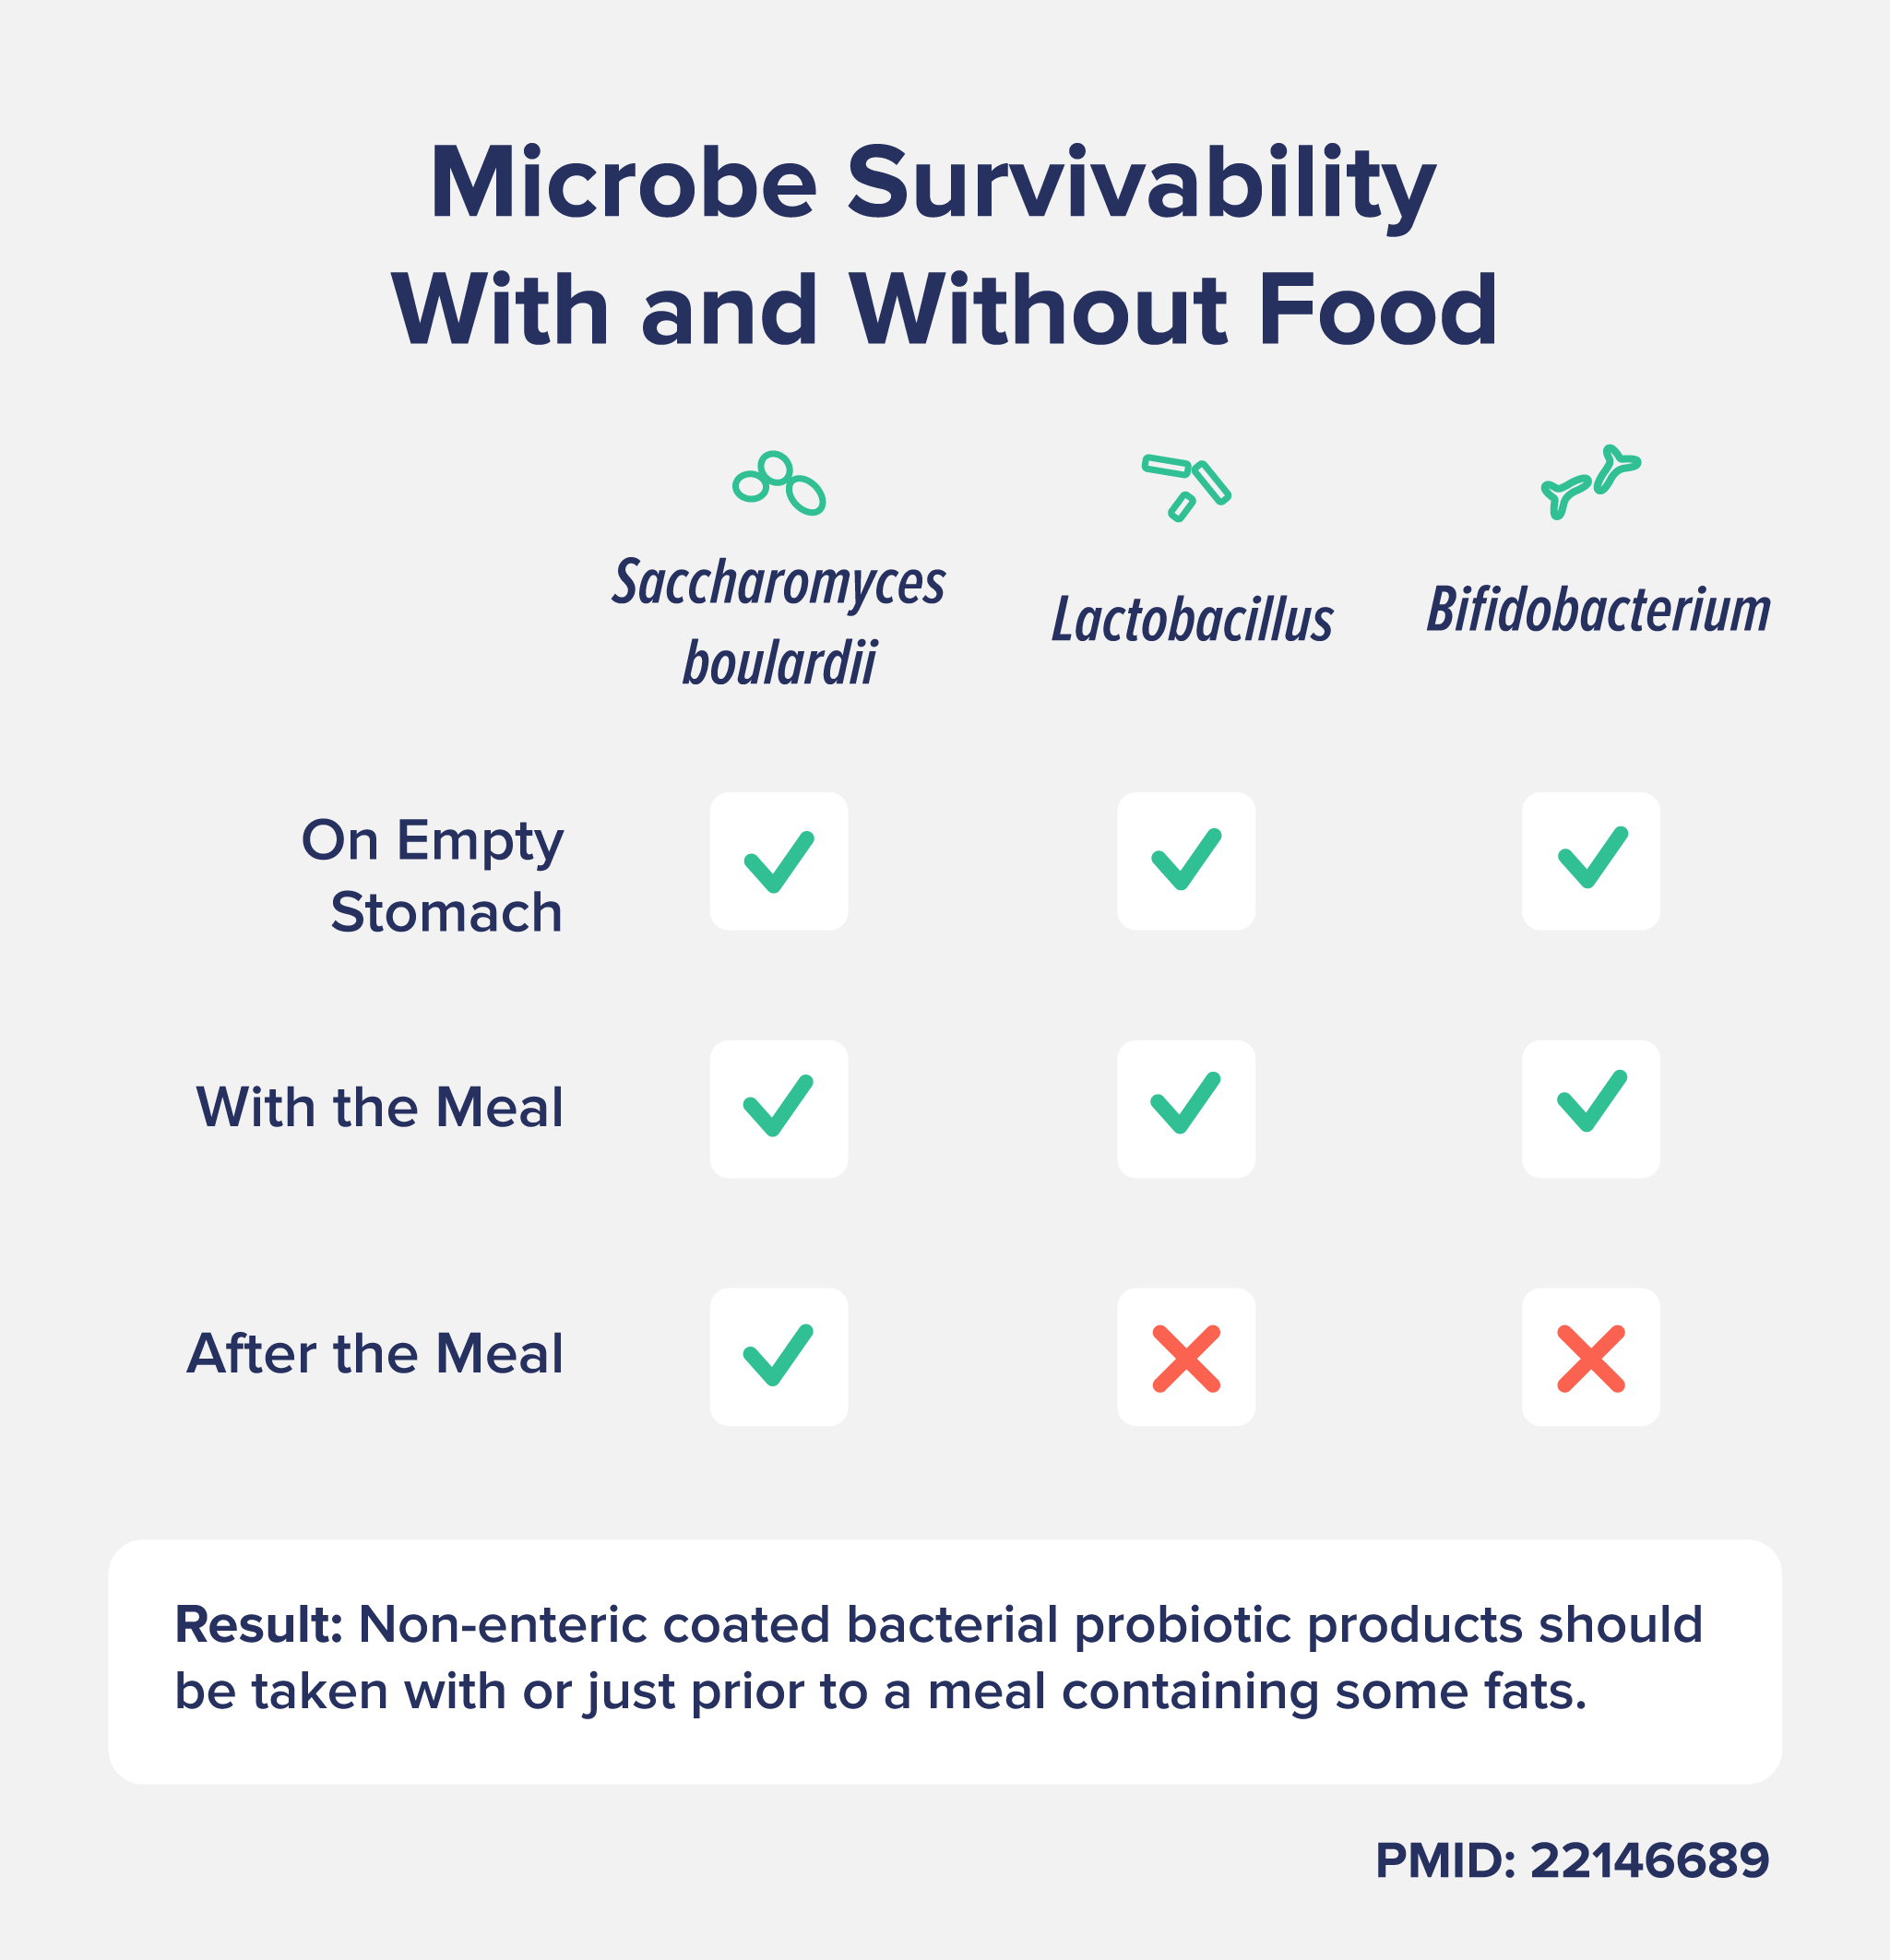 Microbe survivability with and without food